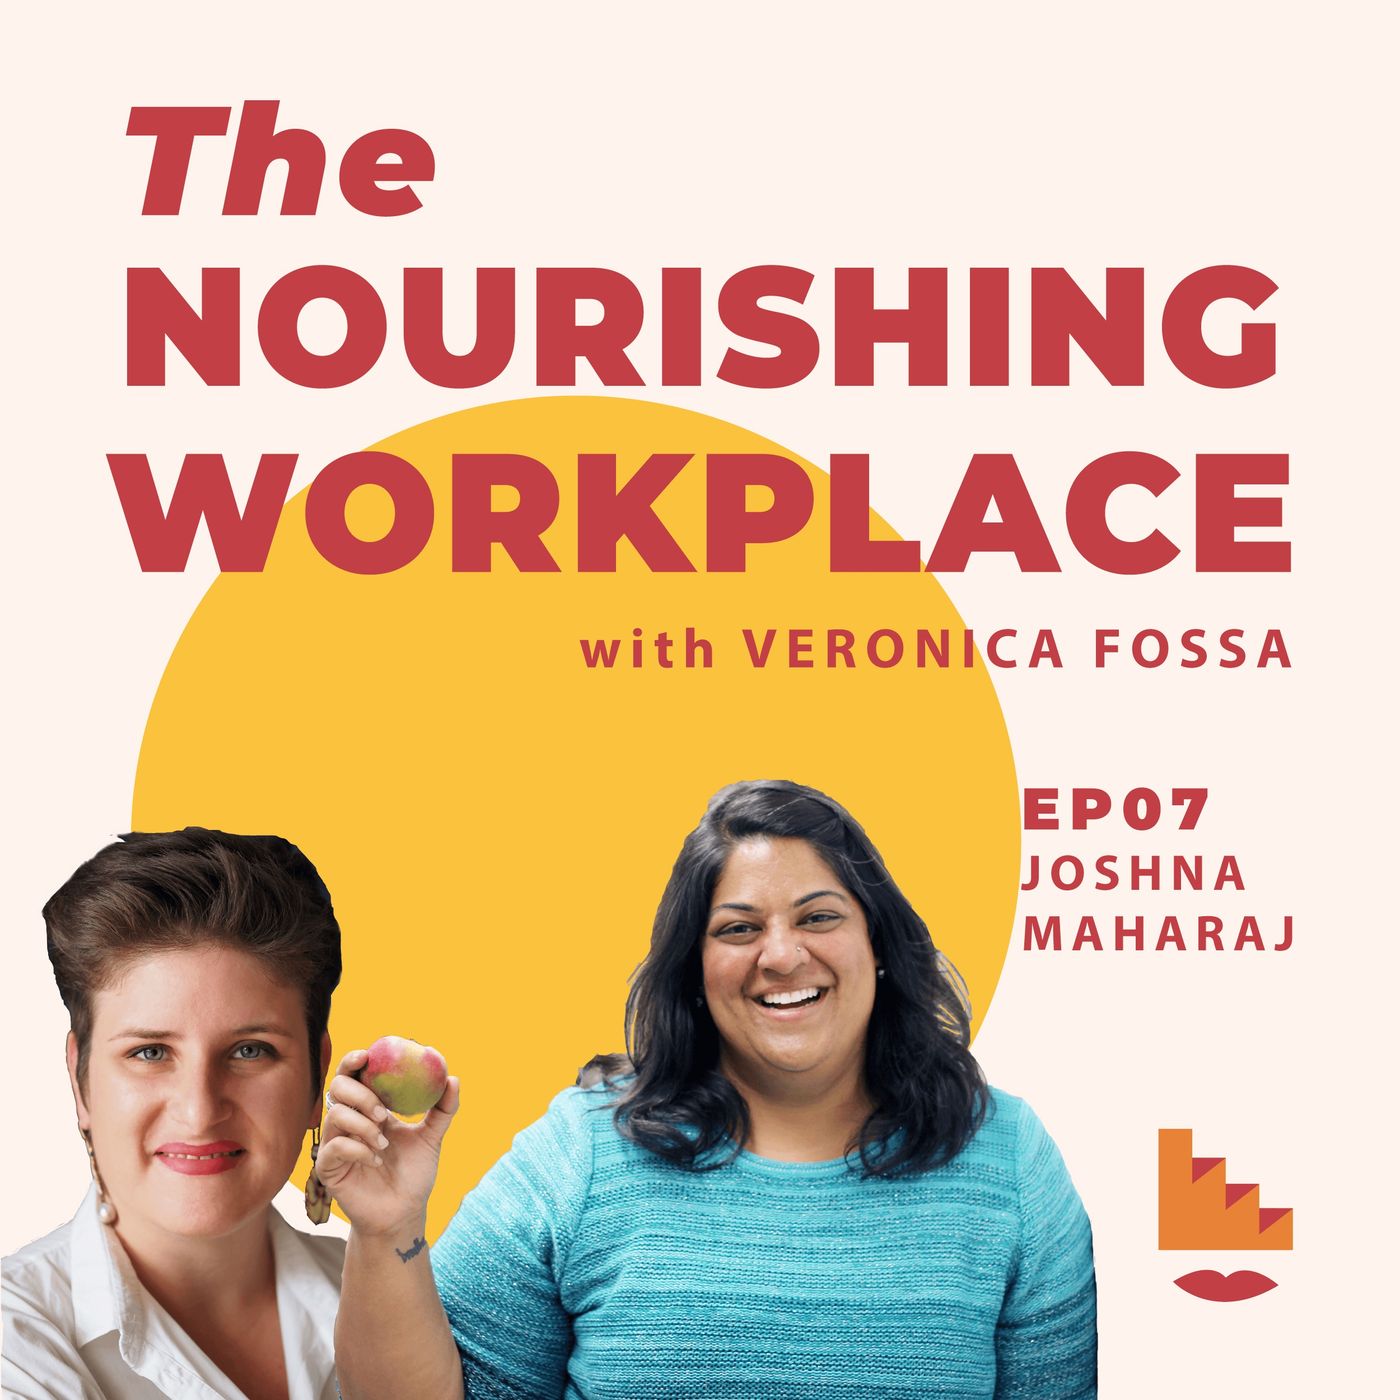 How to Change Institutional Food with Joshna Maharaj